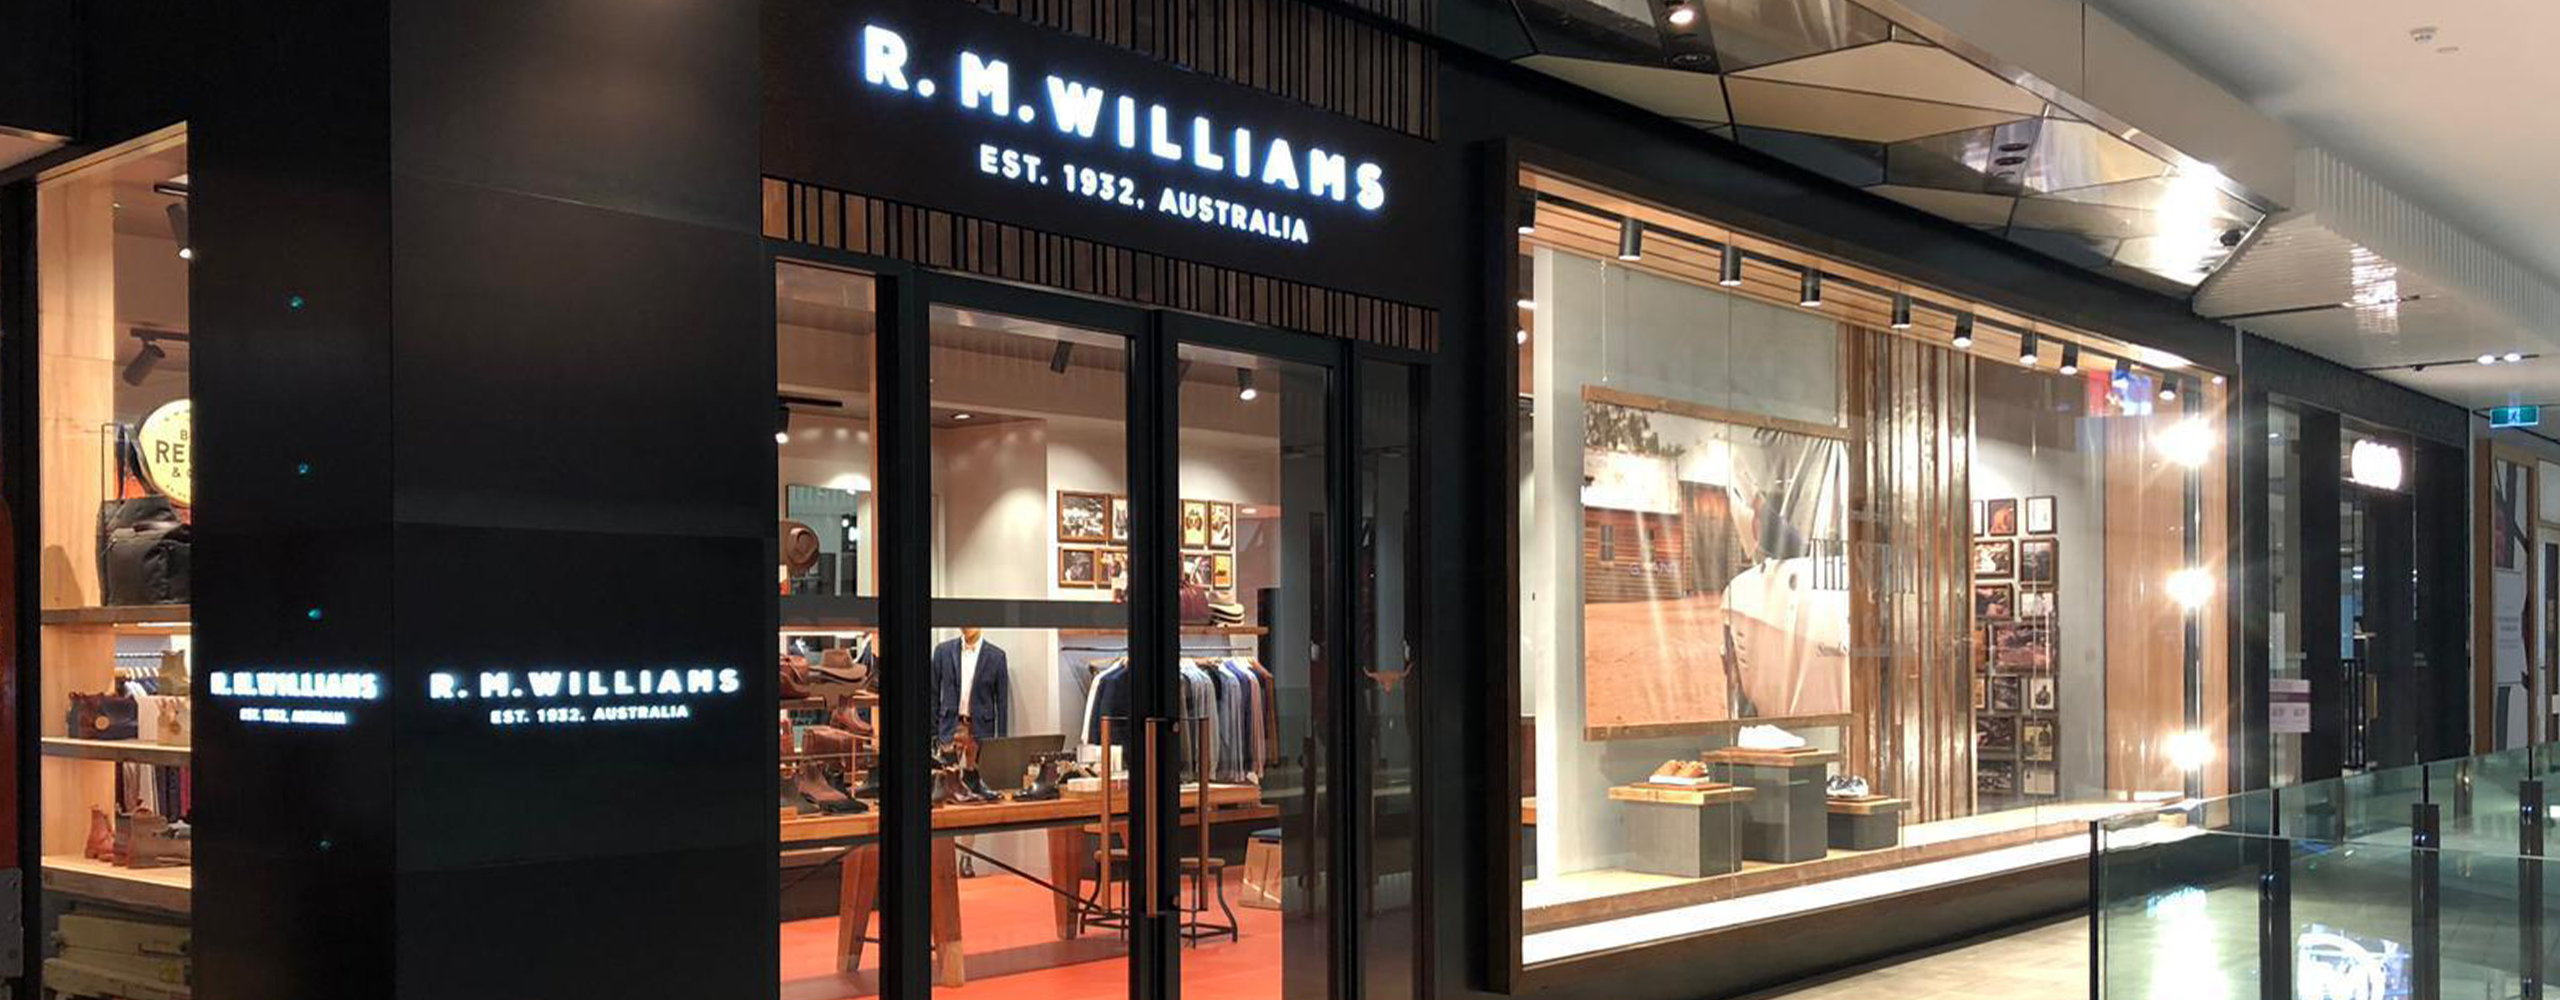 rm williams boots factory outlet